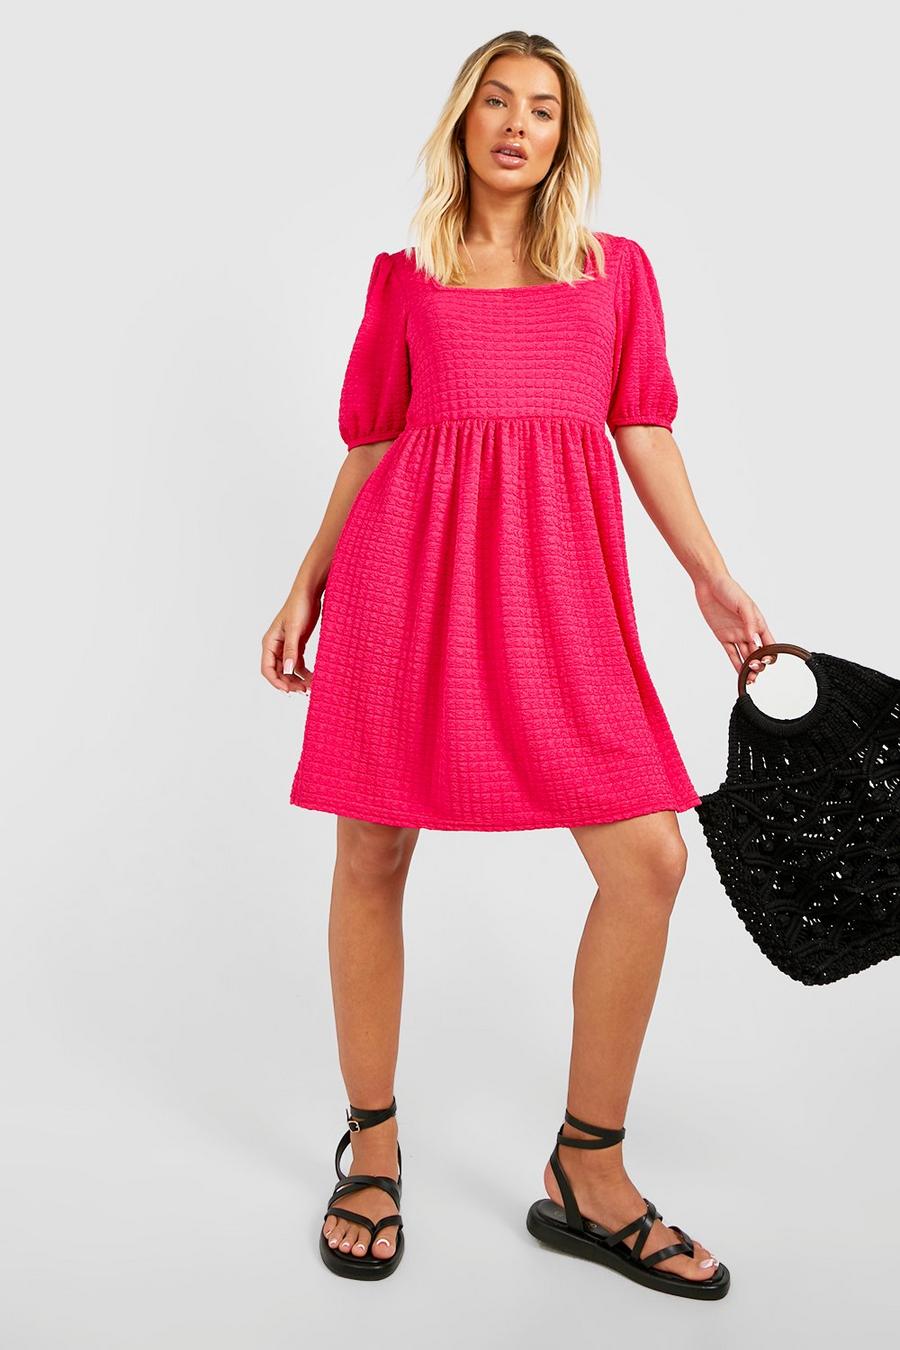 Textured Bubble Puff Sleeve Smock Dress, Hot pink rosa